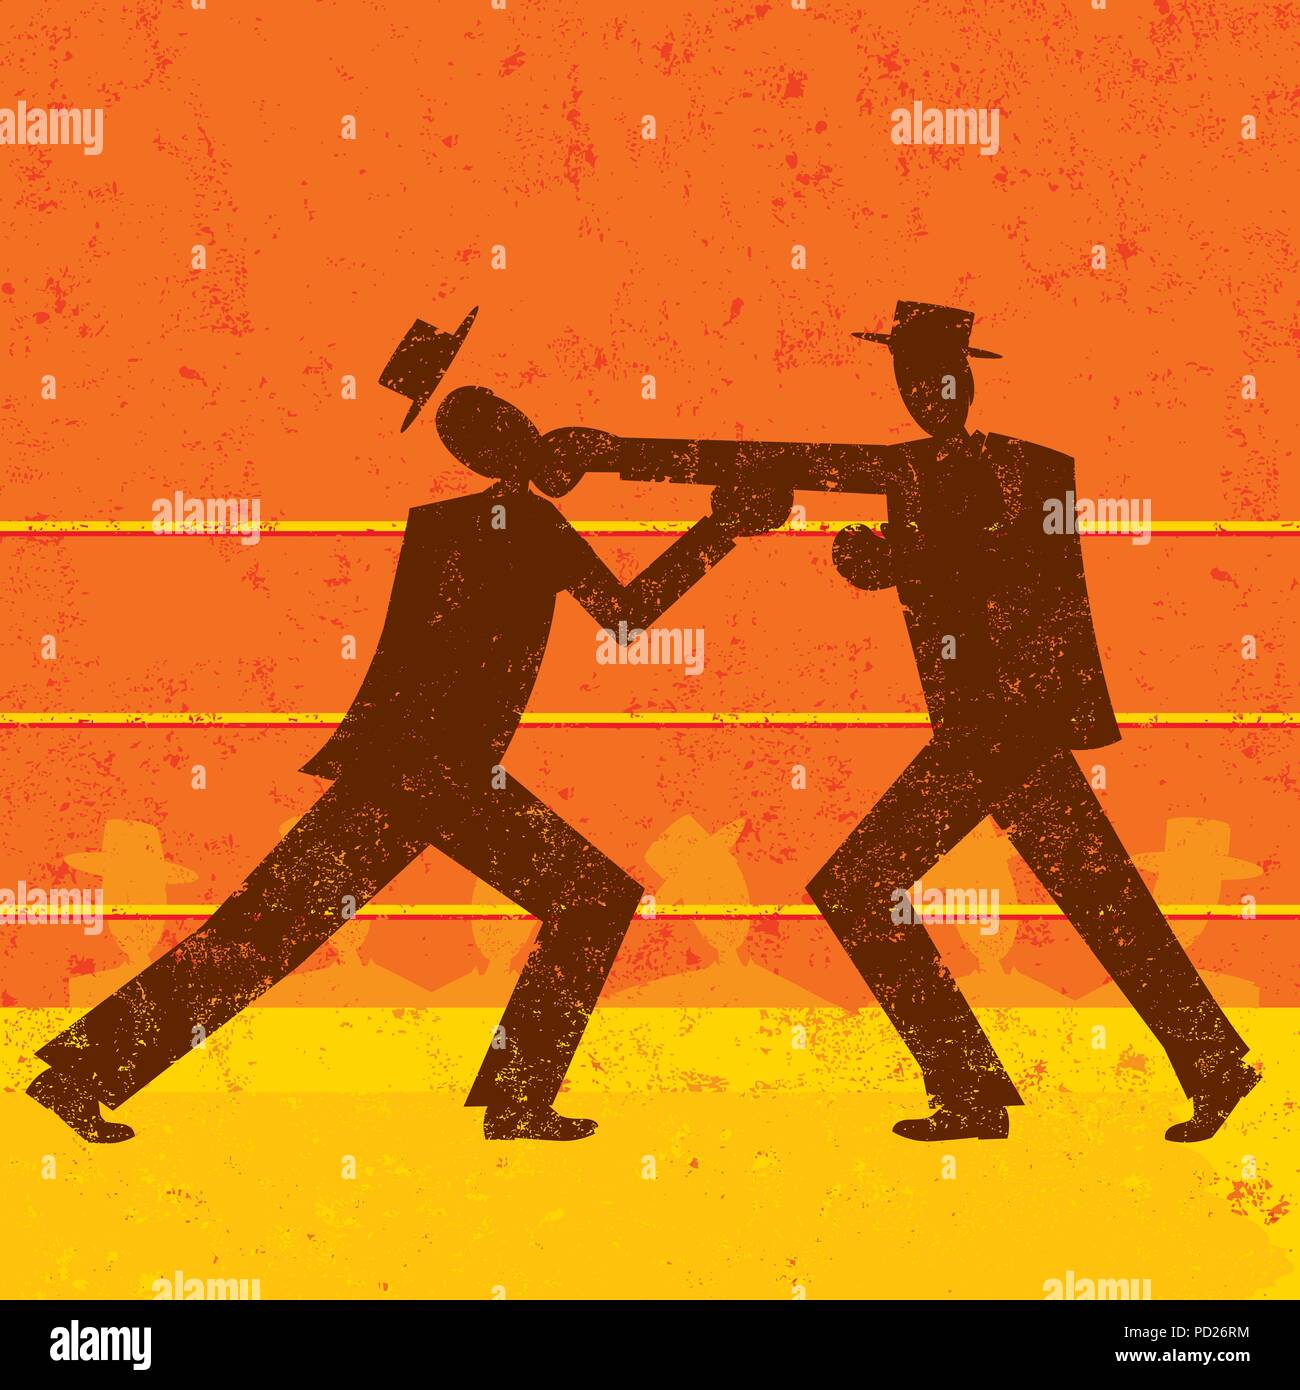 Businessmen boxing match Two retro businessmen fighting in a boxing ring with a crowd watching. Stock Vector